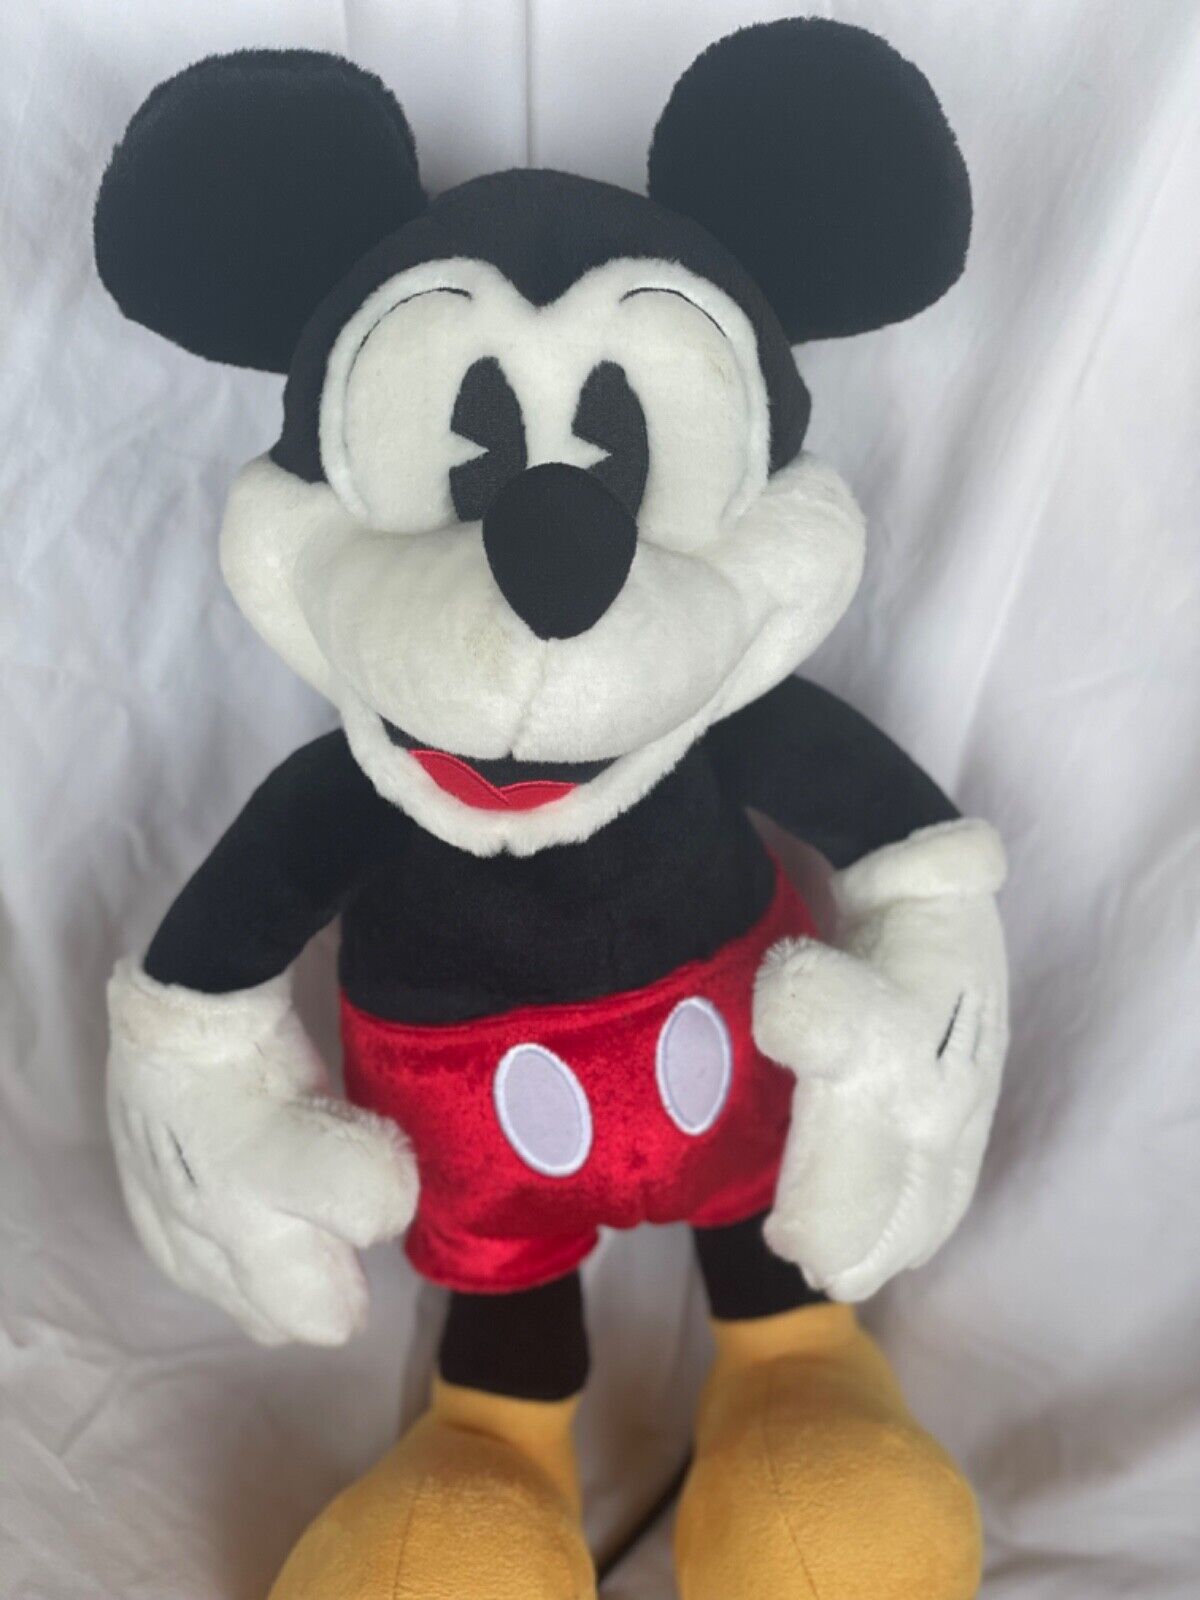 Rare Vintage Mickey Mouse plush with internal wire arms/legs and shoestring tail